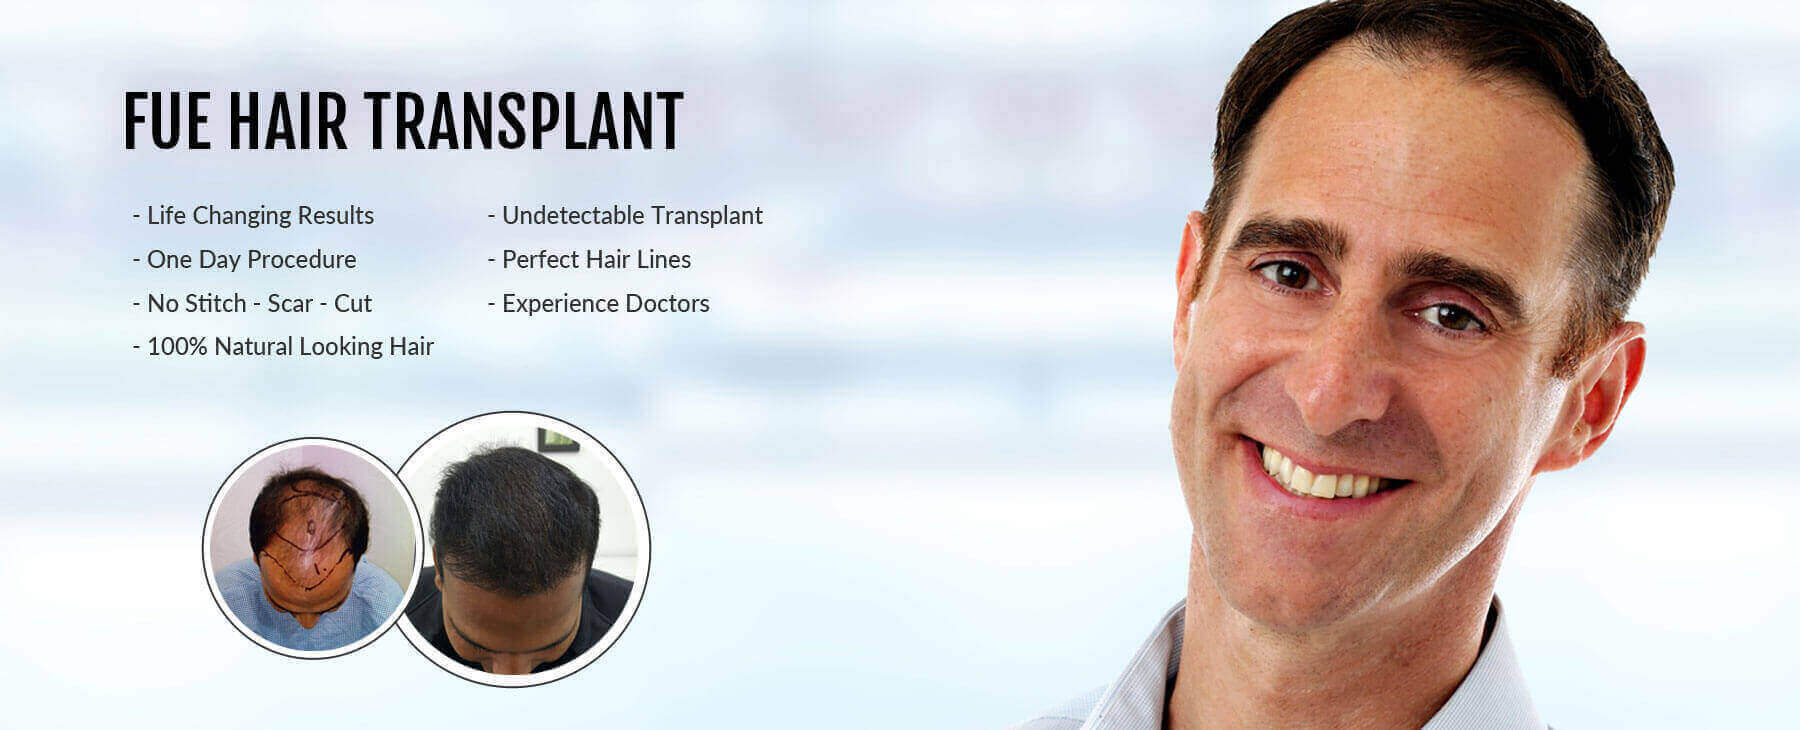 What are the best Hair Transplant Techniques that you can use